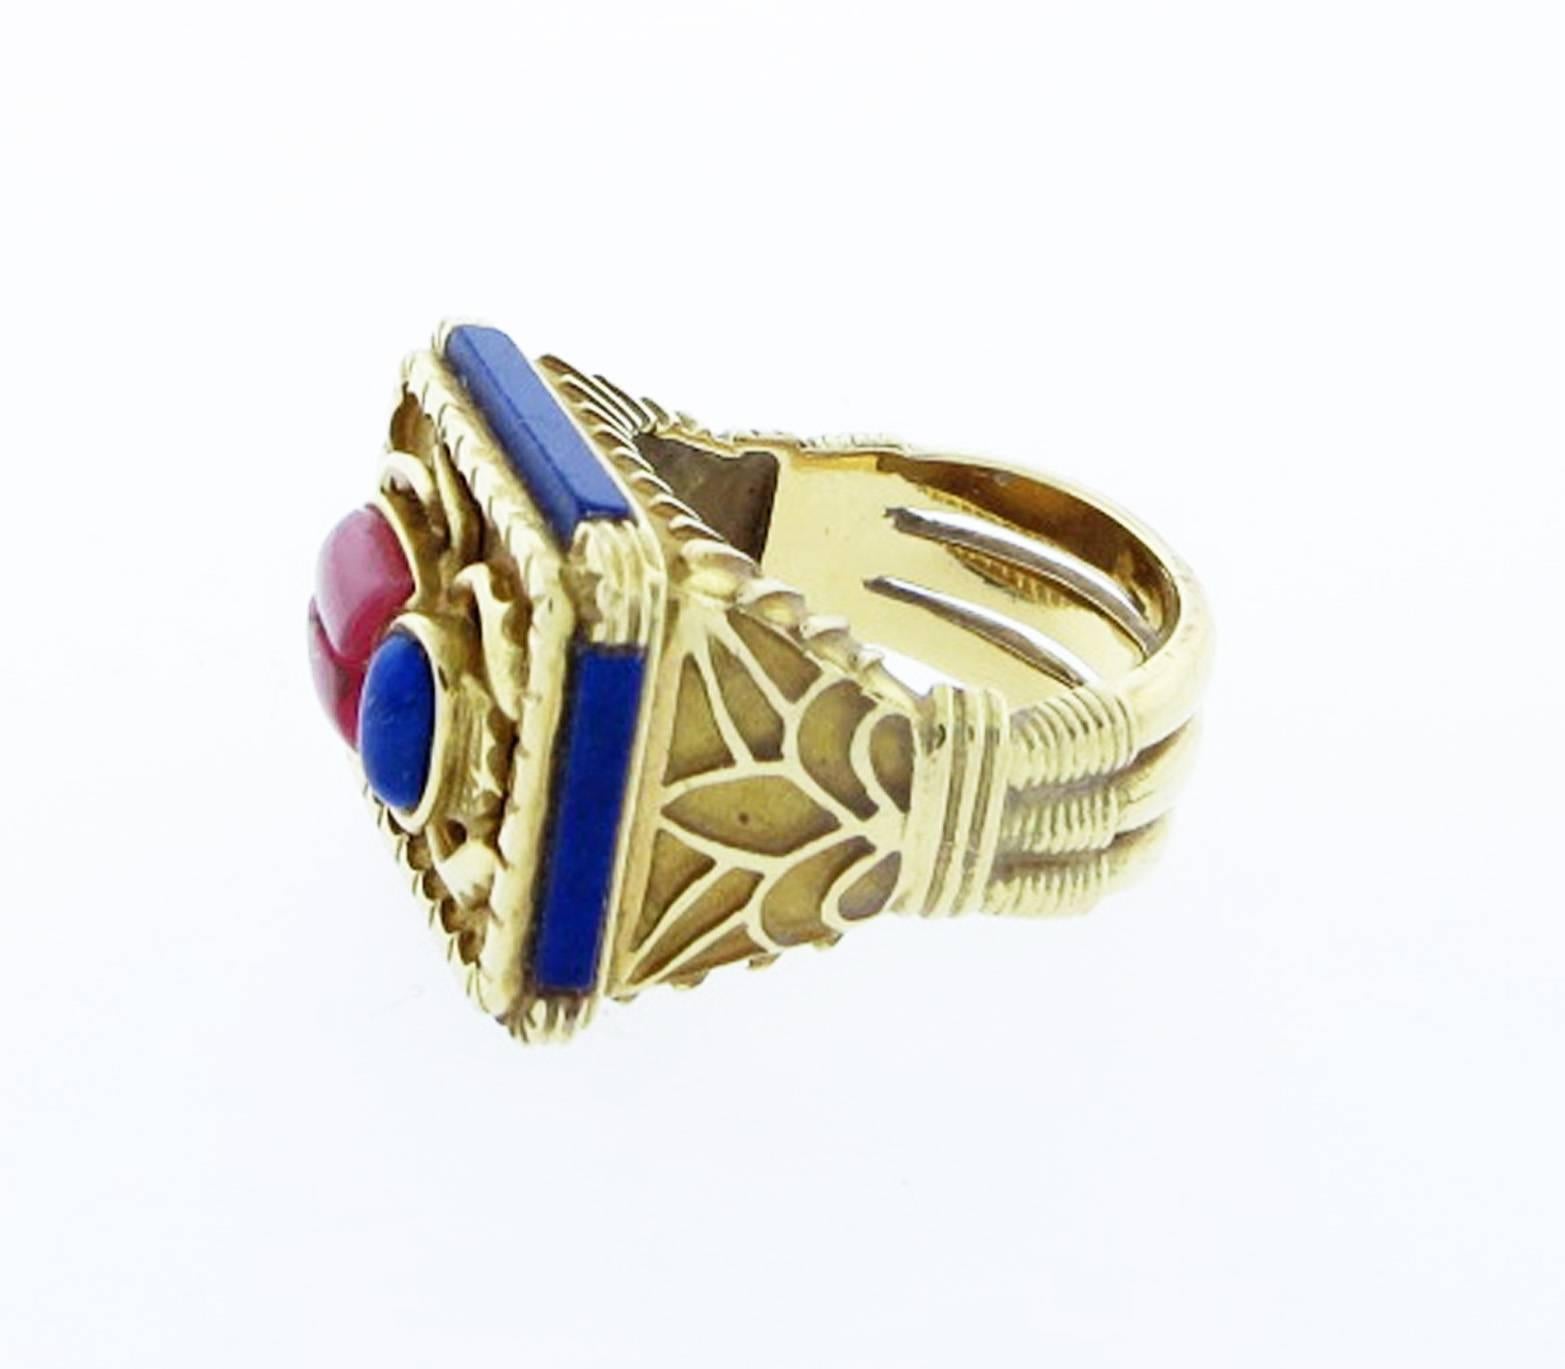 Substantial Egyptian inspired 18kt. yellow gold ring with an inlay scarab motif center of natural rhodochrosite and lapis. The edges of the richly detailed mount ring are set with inlays of lapis. Size 8 and can be sized. Ideal for a man or a woman !